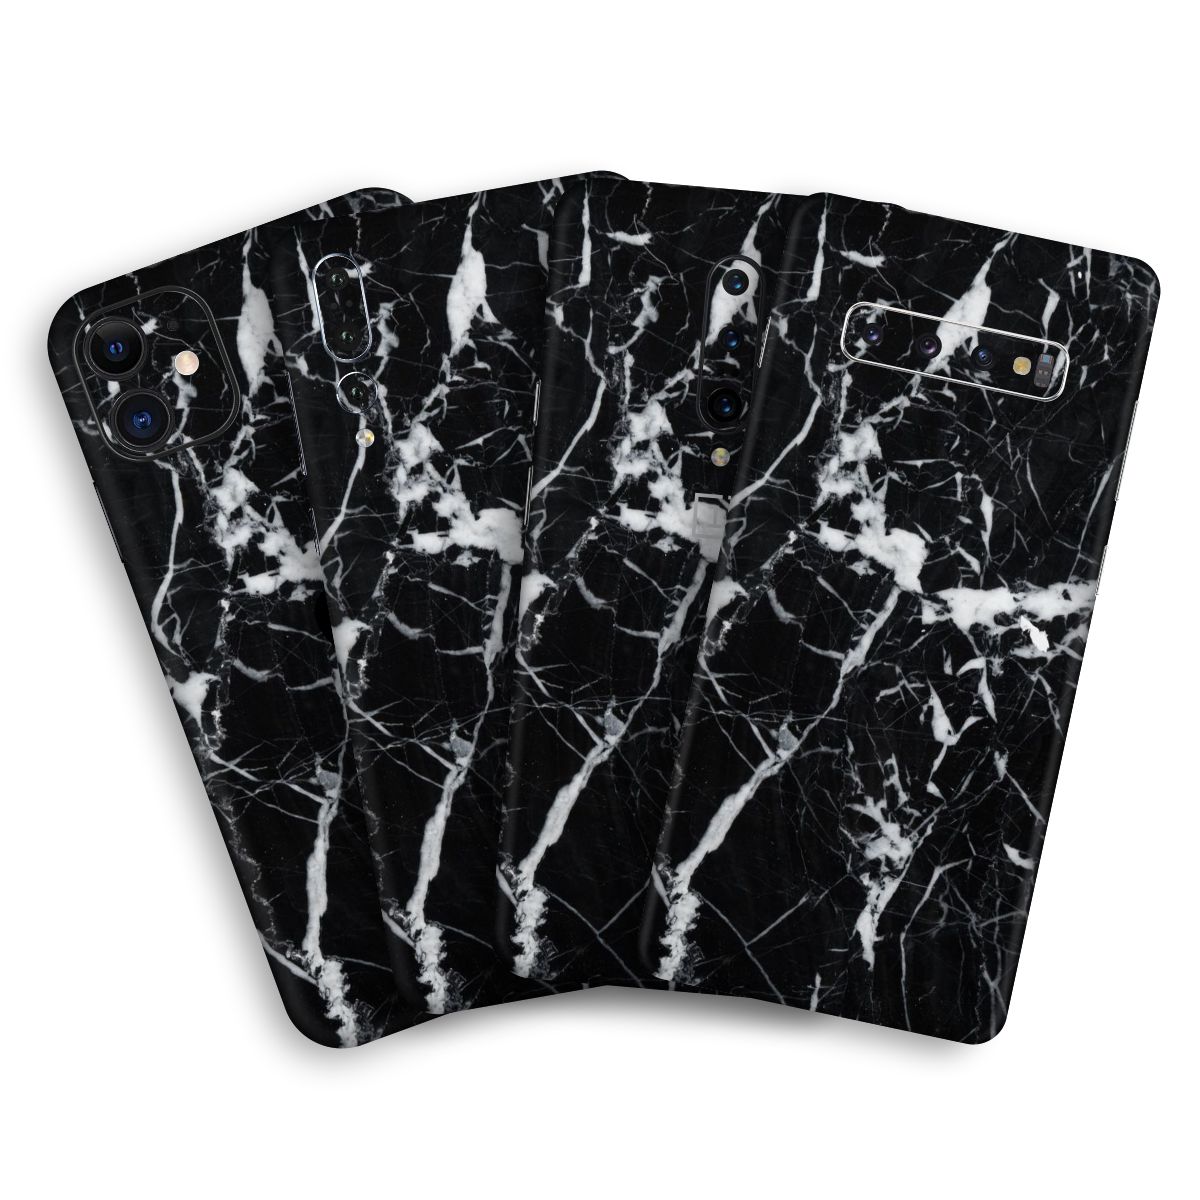 Black Marble Mobile Skin / Mobile Wrap for Samsung Galaxy S10E